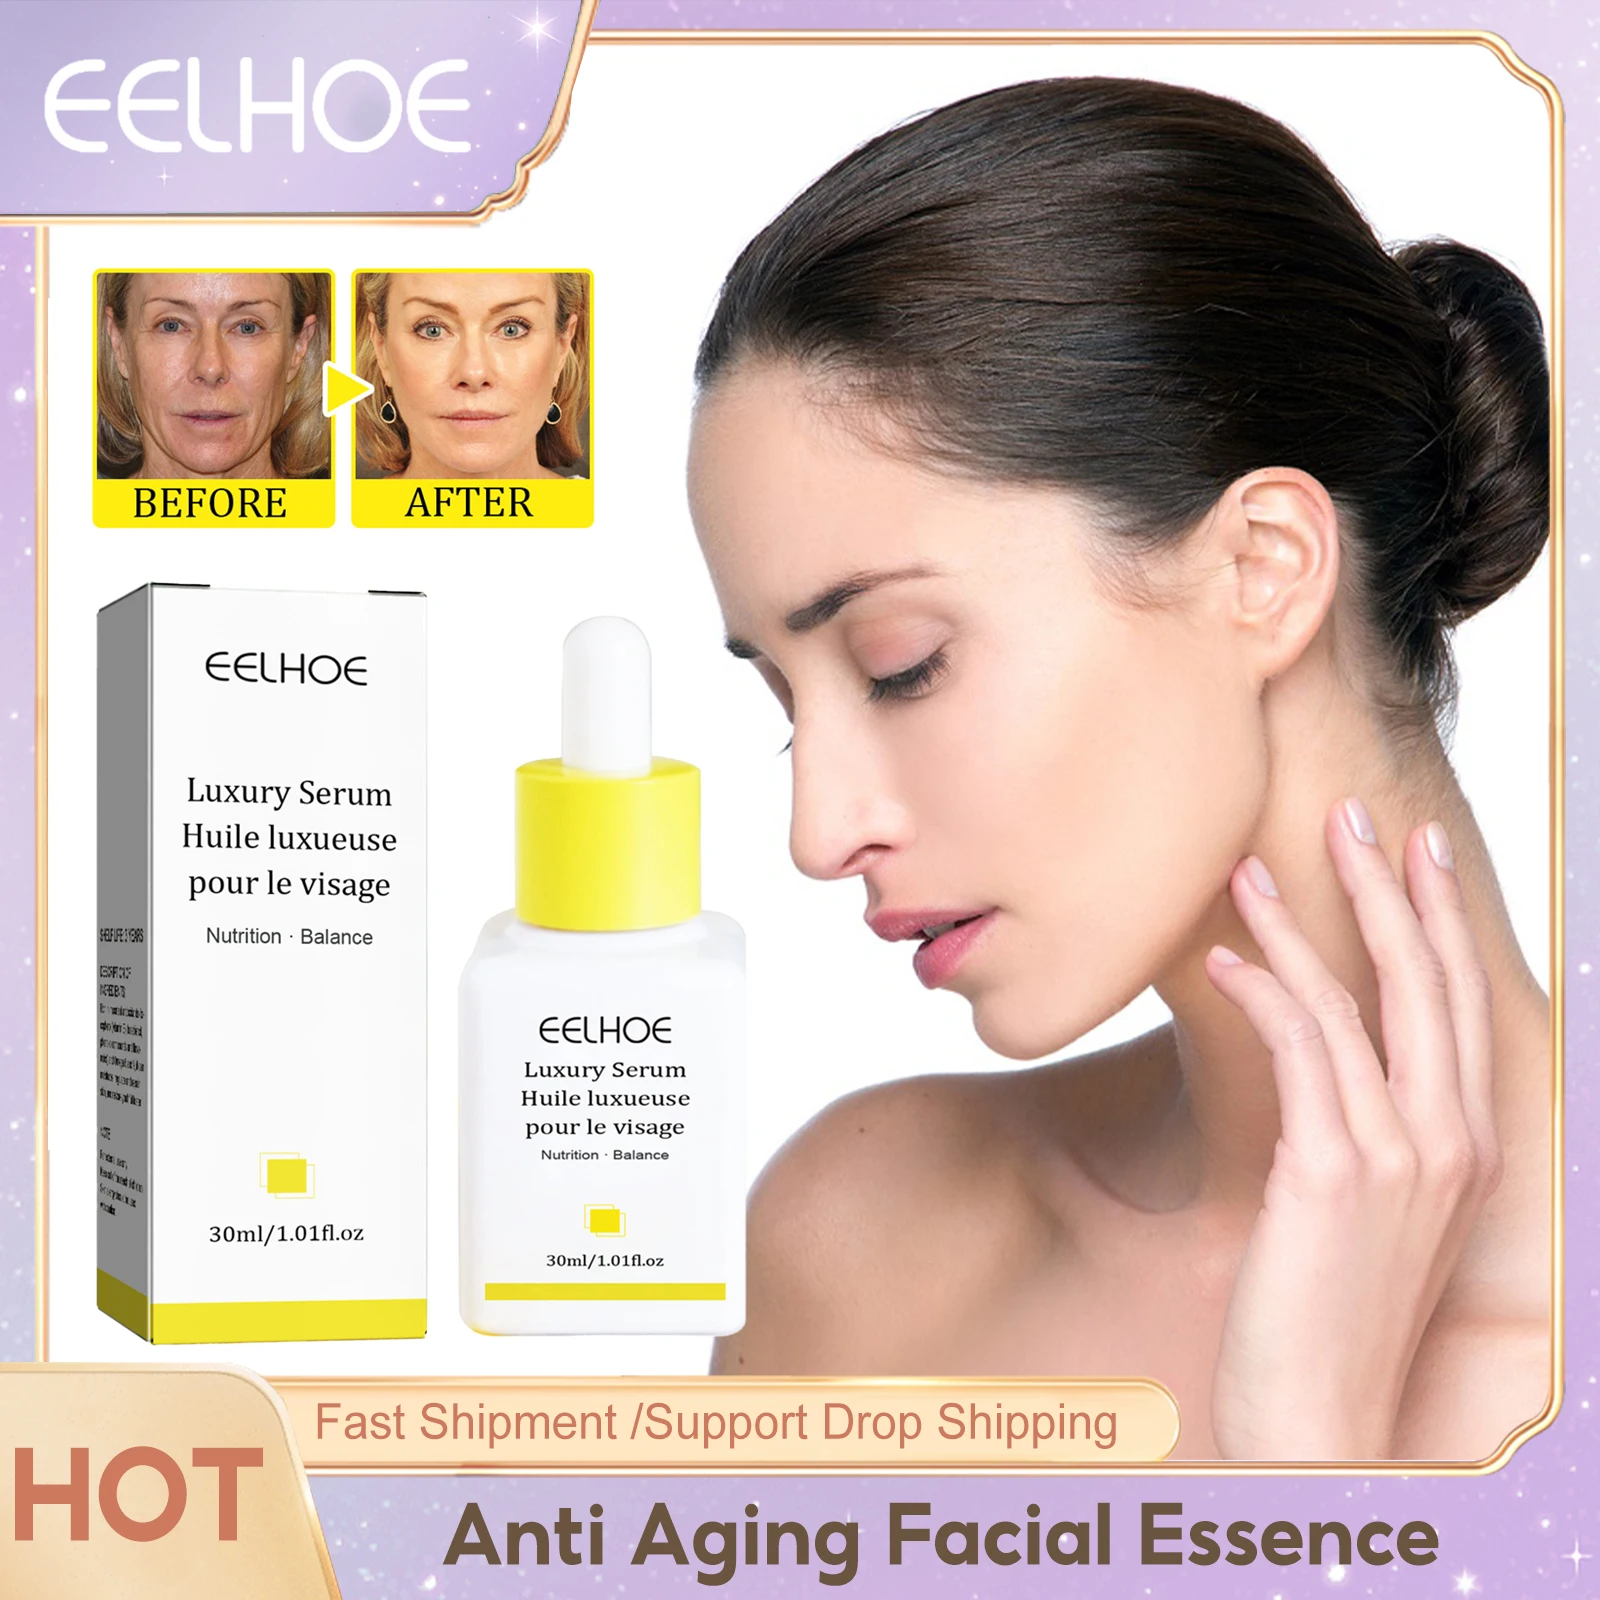 

Effective Anti Wrinkle Serum Brighten Face Skin Fade Fine Lines Lifting Firming Moisturizing Hydrating Anti Aging Facial Essence